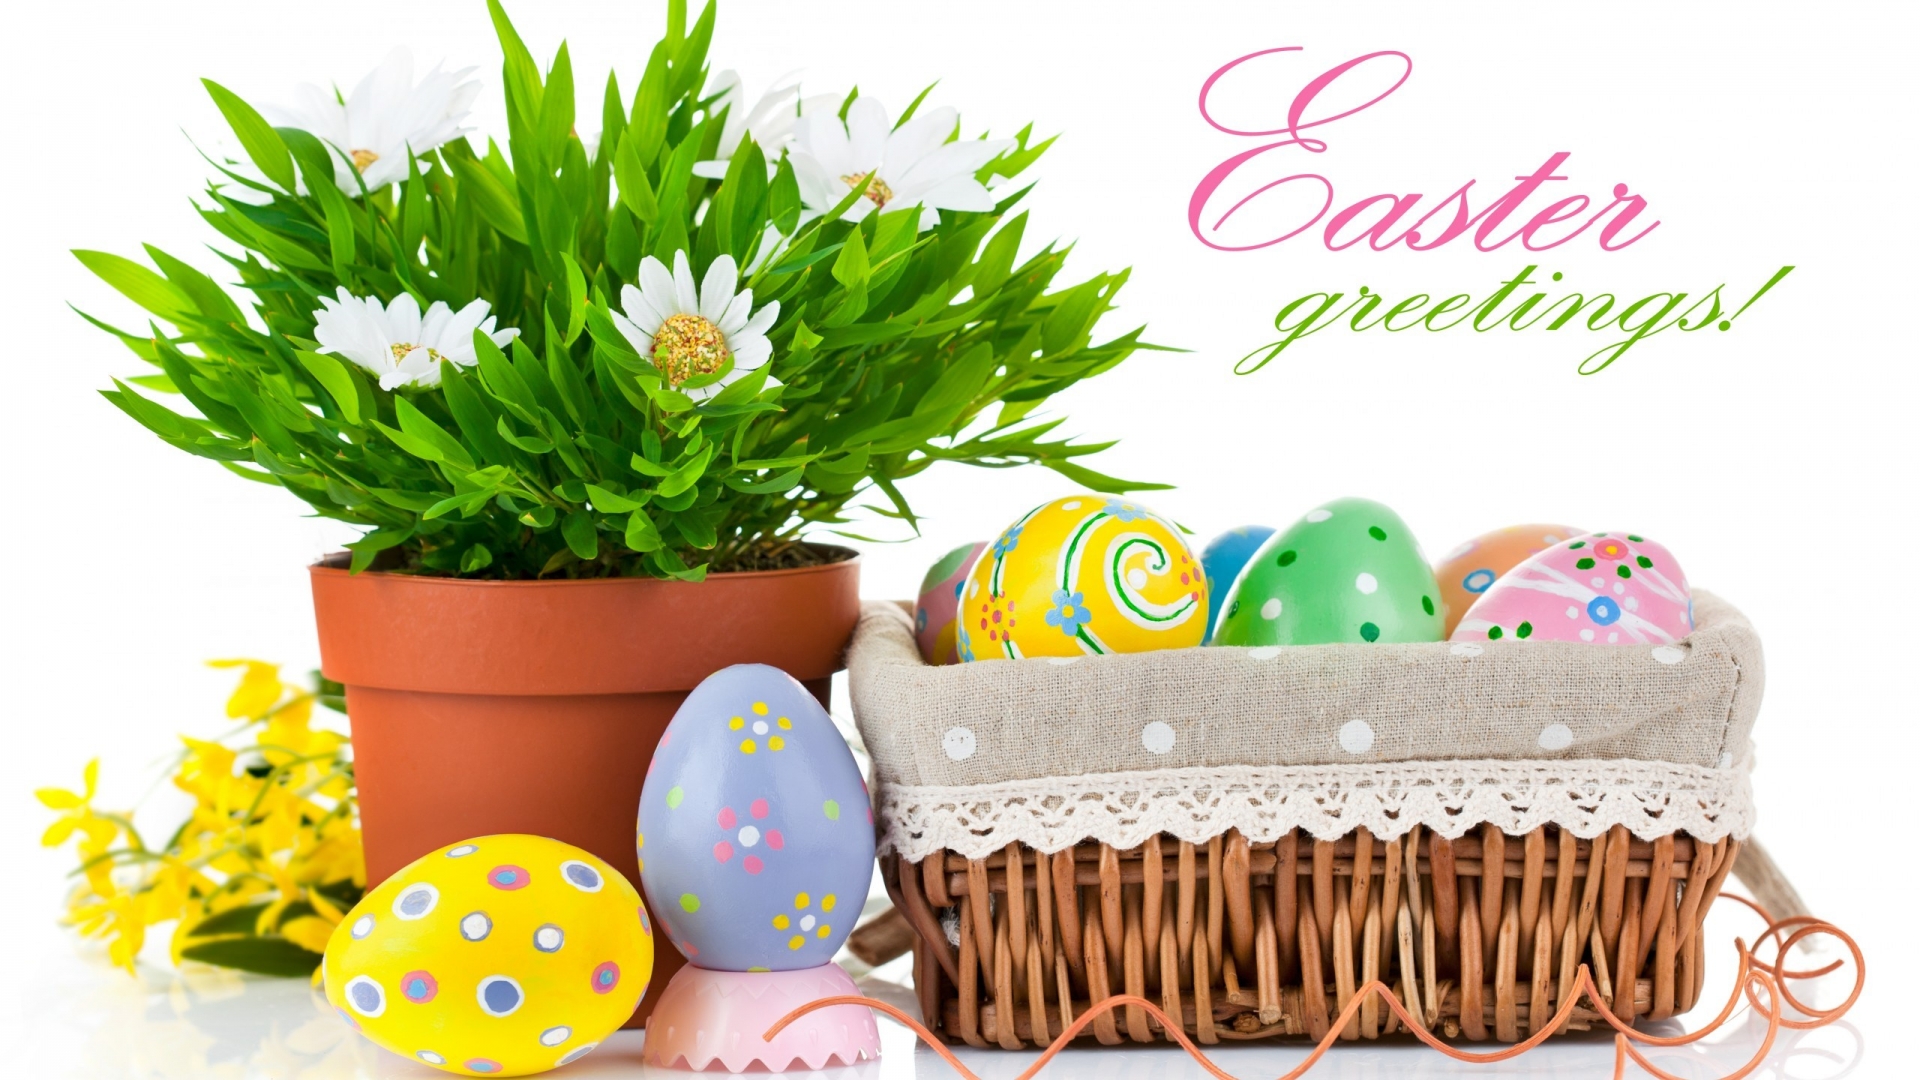 Easter Greetings for 1920 x 1080 HDTV 1080p resolution